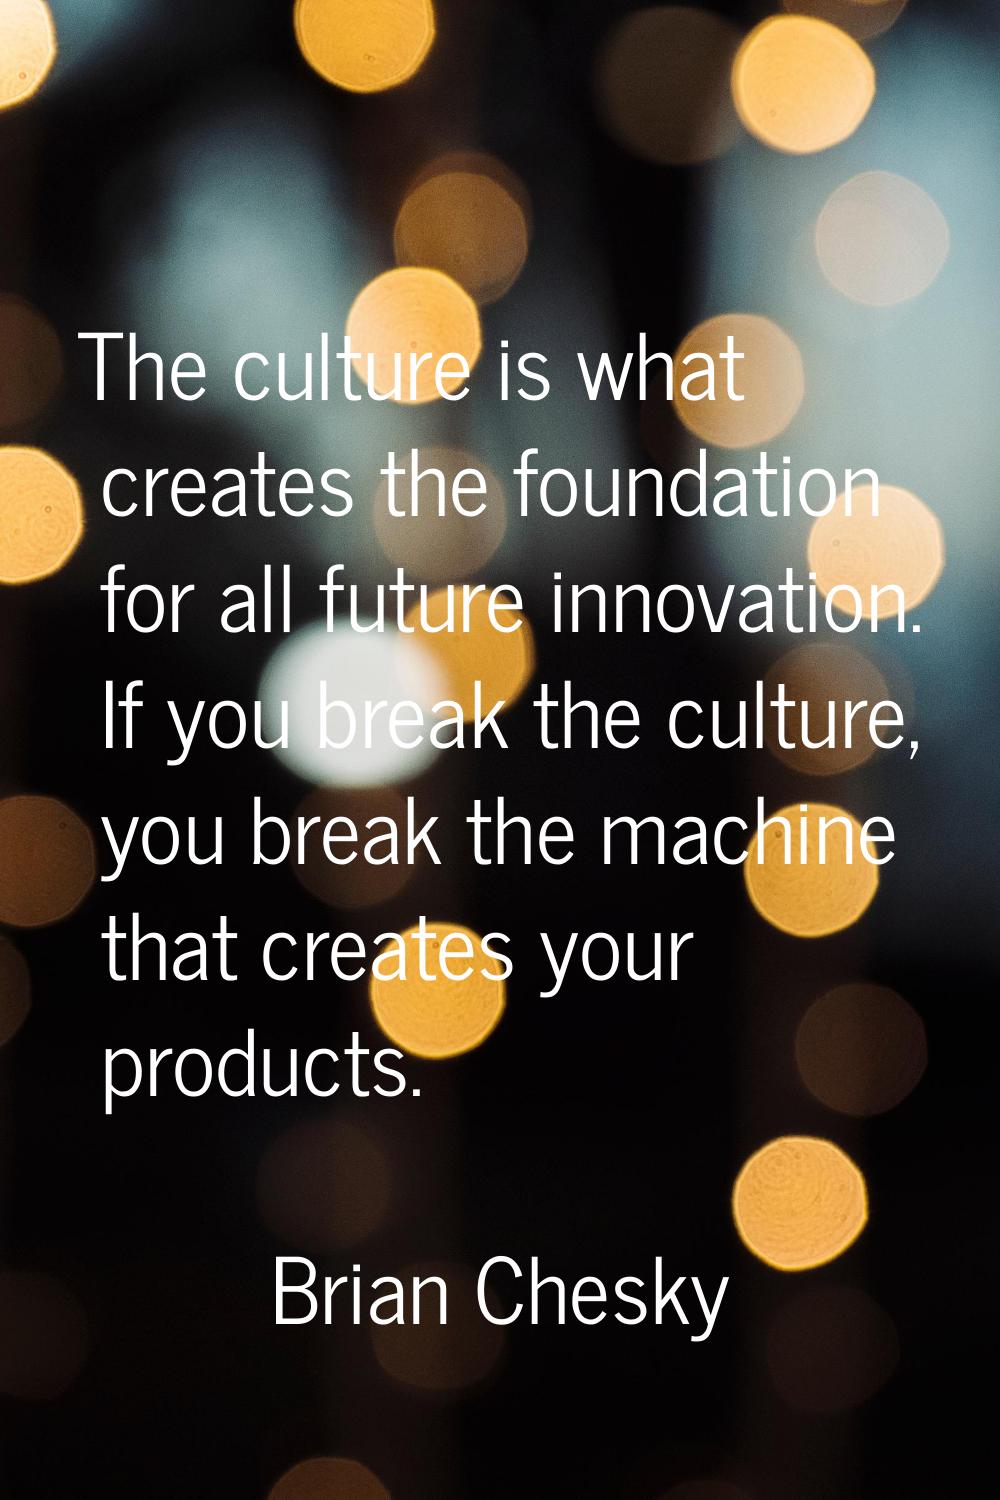 The culture is what creates the foundation for all future innovation. If you break the culture, you